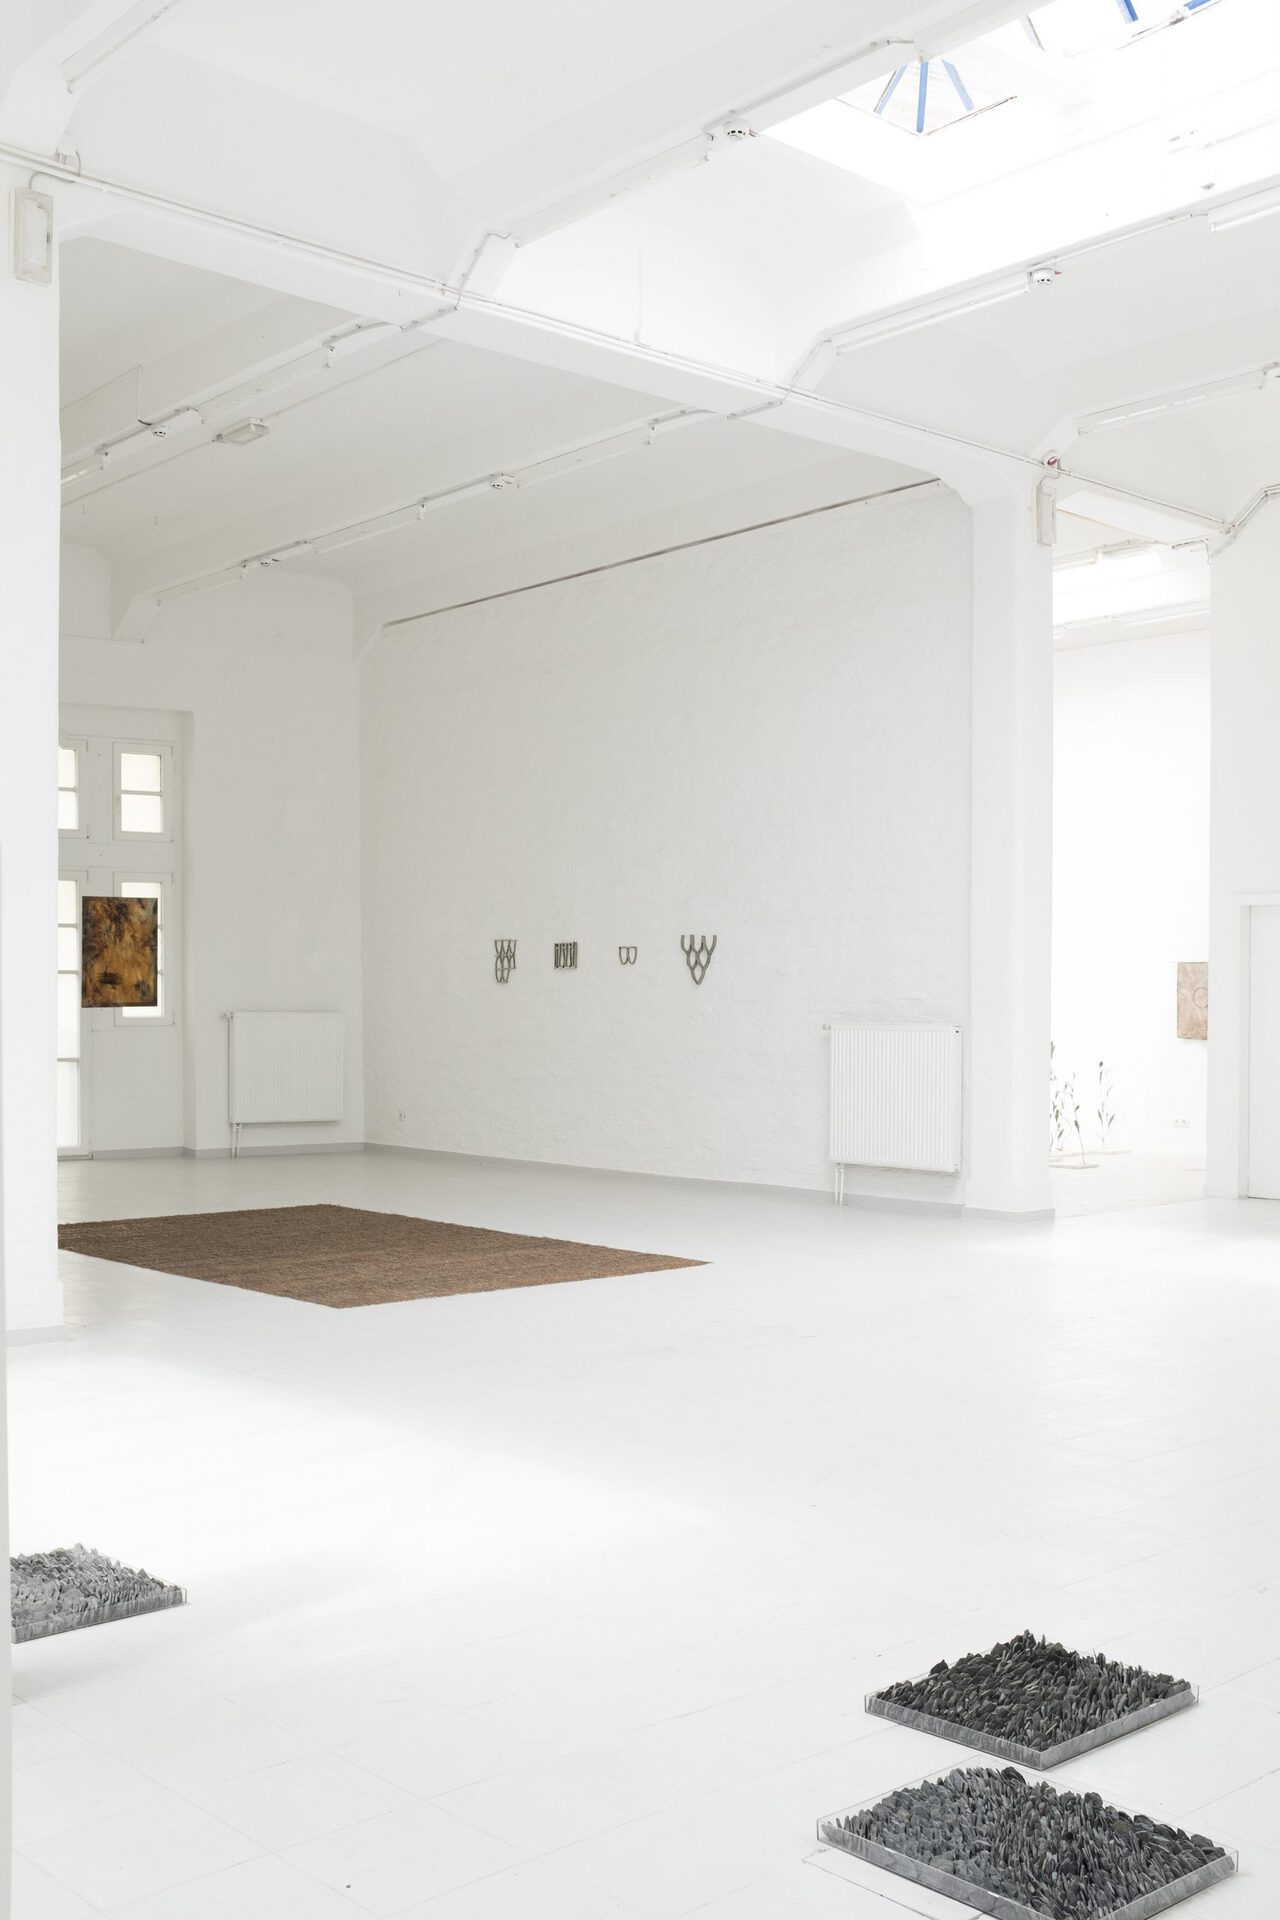 Exhibition View, in front, Katharina Gahlert, Talking to Stones, 2021, Acrylic glass boxes, stones, 60 x 50 cm